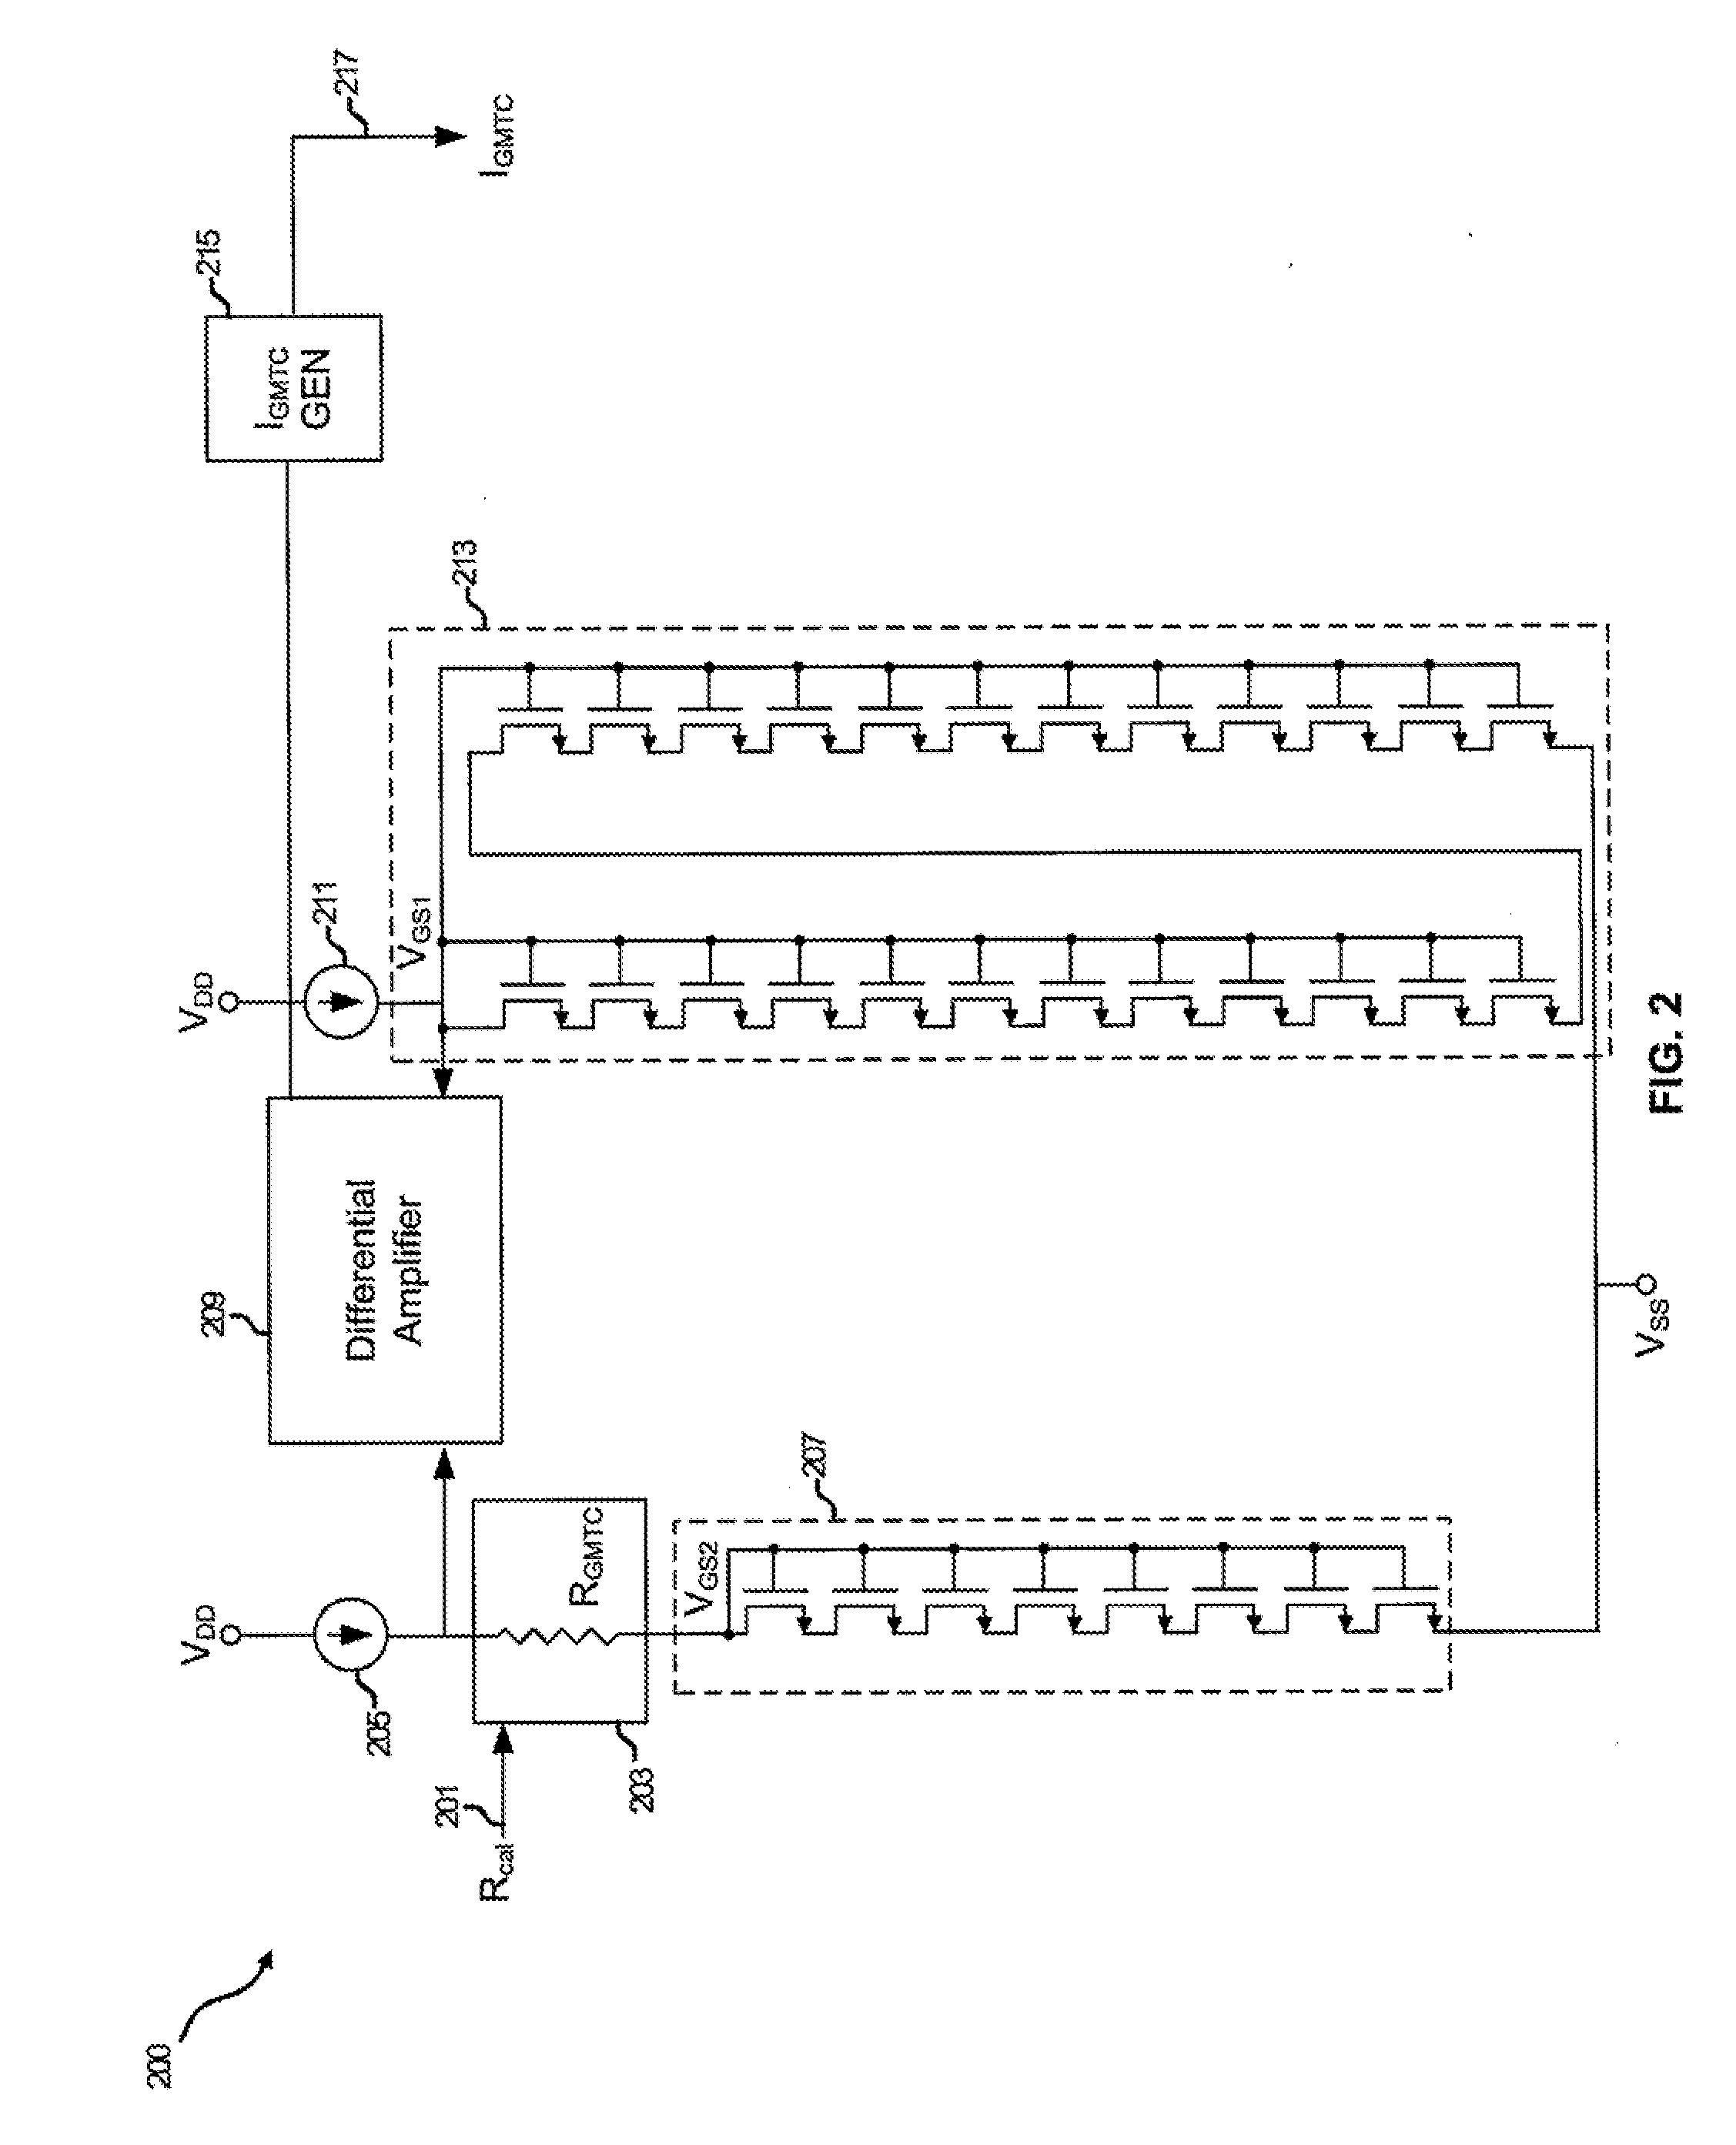 Method and system for a process sensor to compensate soc parameters in the presence of IC process manufacturing variations